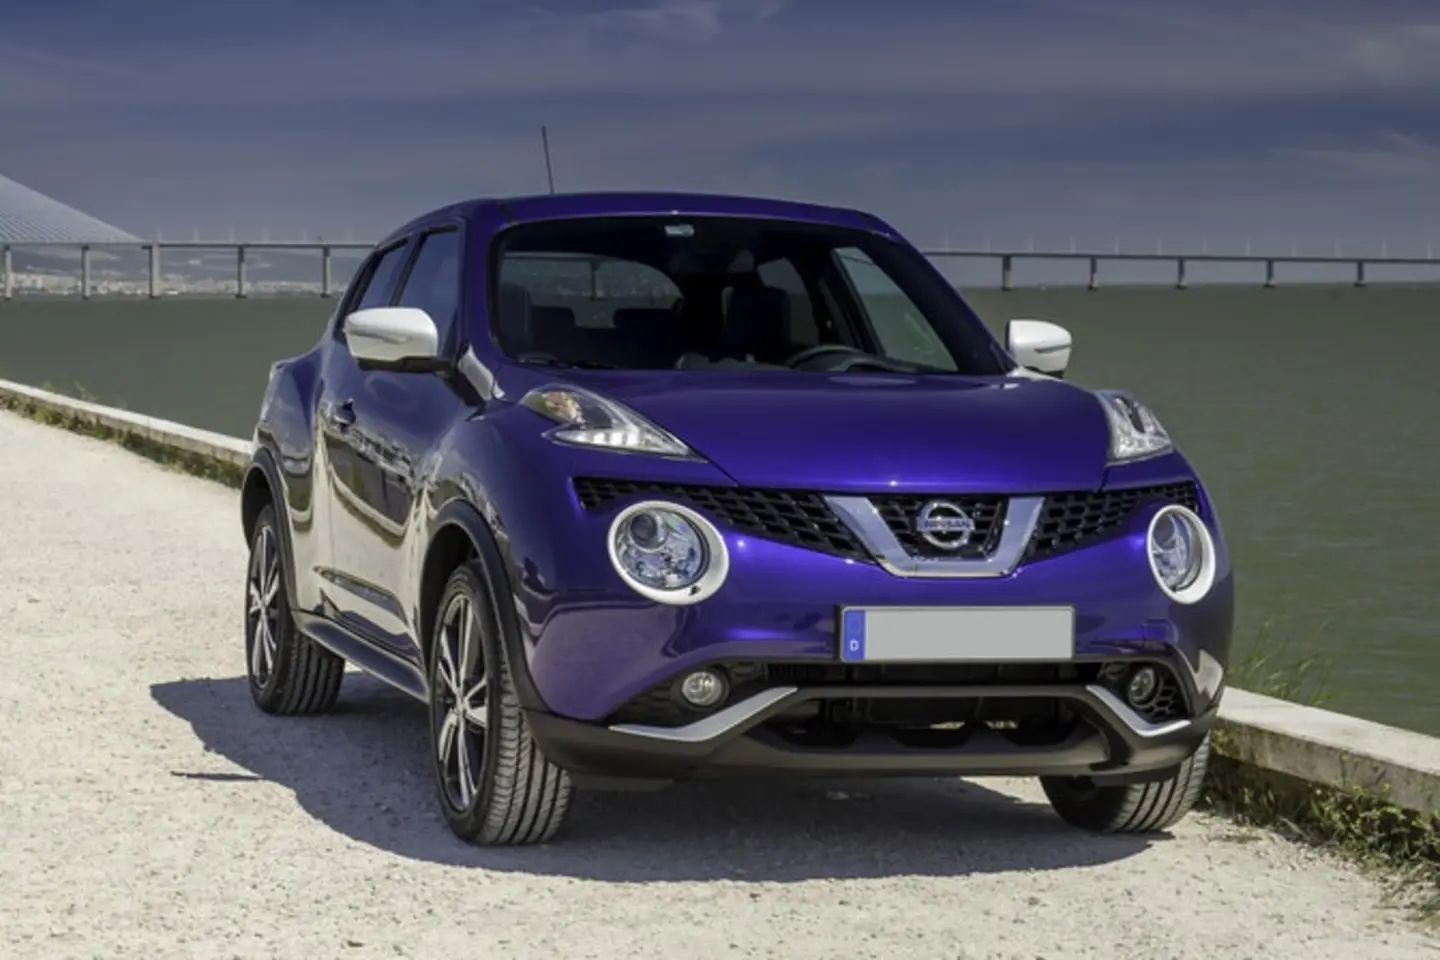 The front exterior of a Nissan Juke